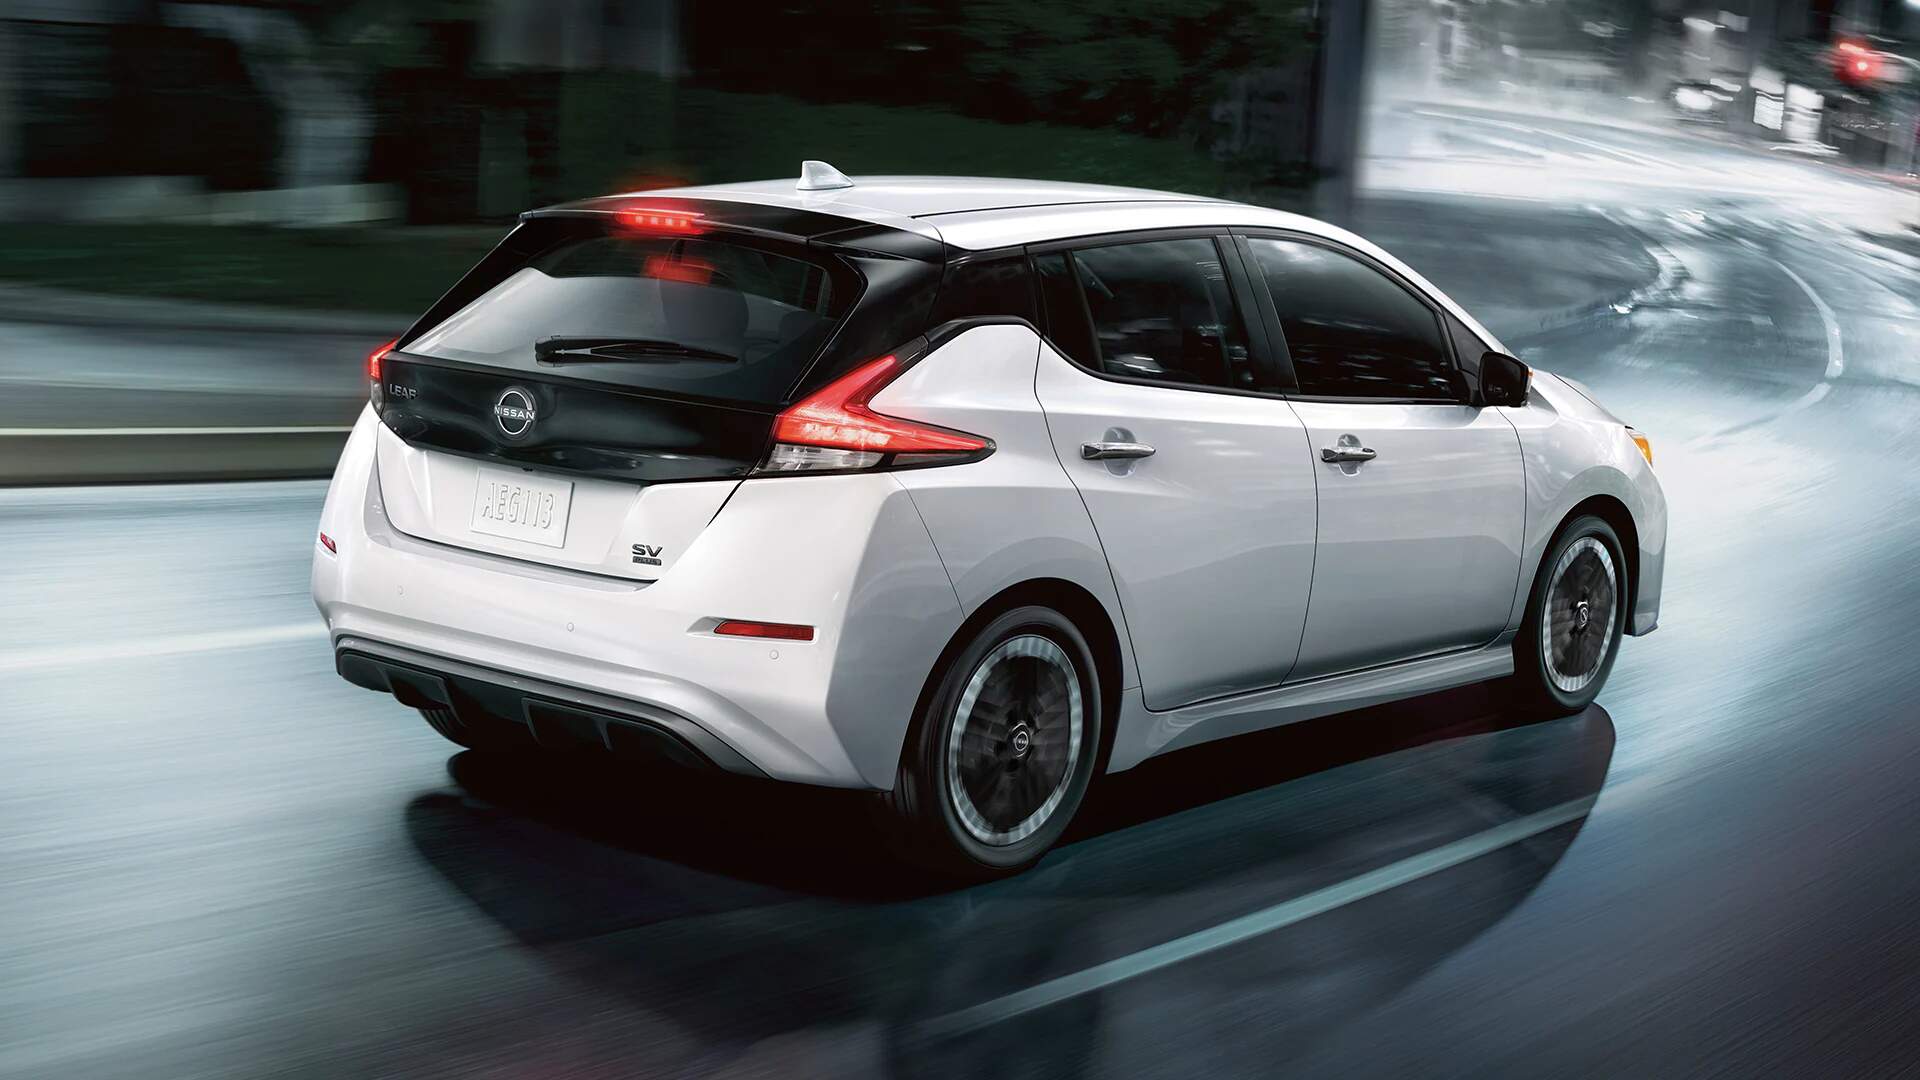 Find the perfect used Nissan Leaf for your needs at Nissan of Cool Springs. We have a vast selection of used 2019 Nissan Leaf, 2015 Nissan Leaf,2021 Nissan Leaf, 2020 Nissan Leaf, and 2013 Nissan Leaf models available.